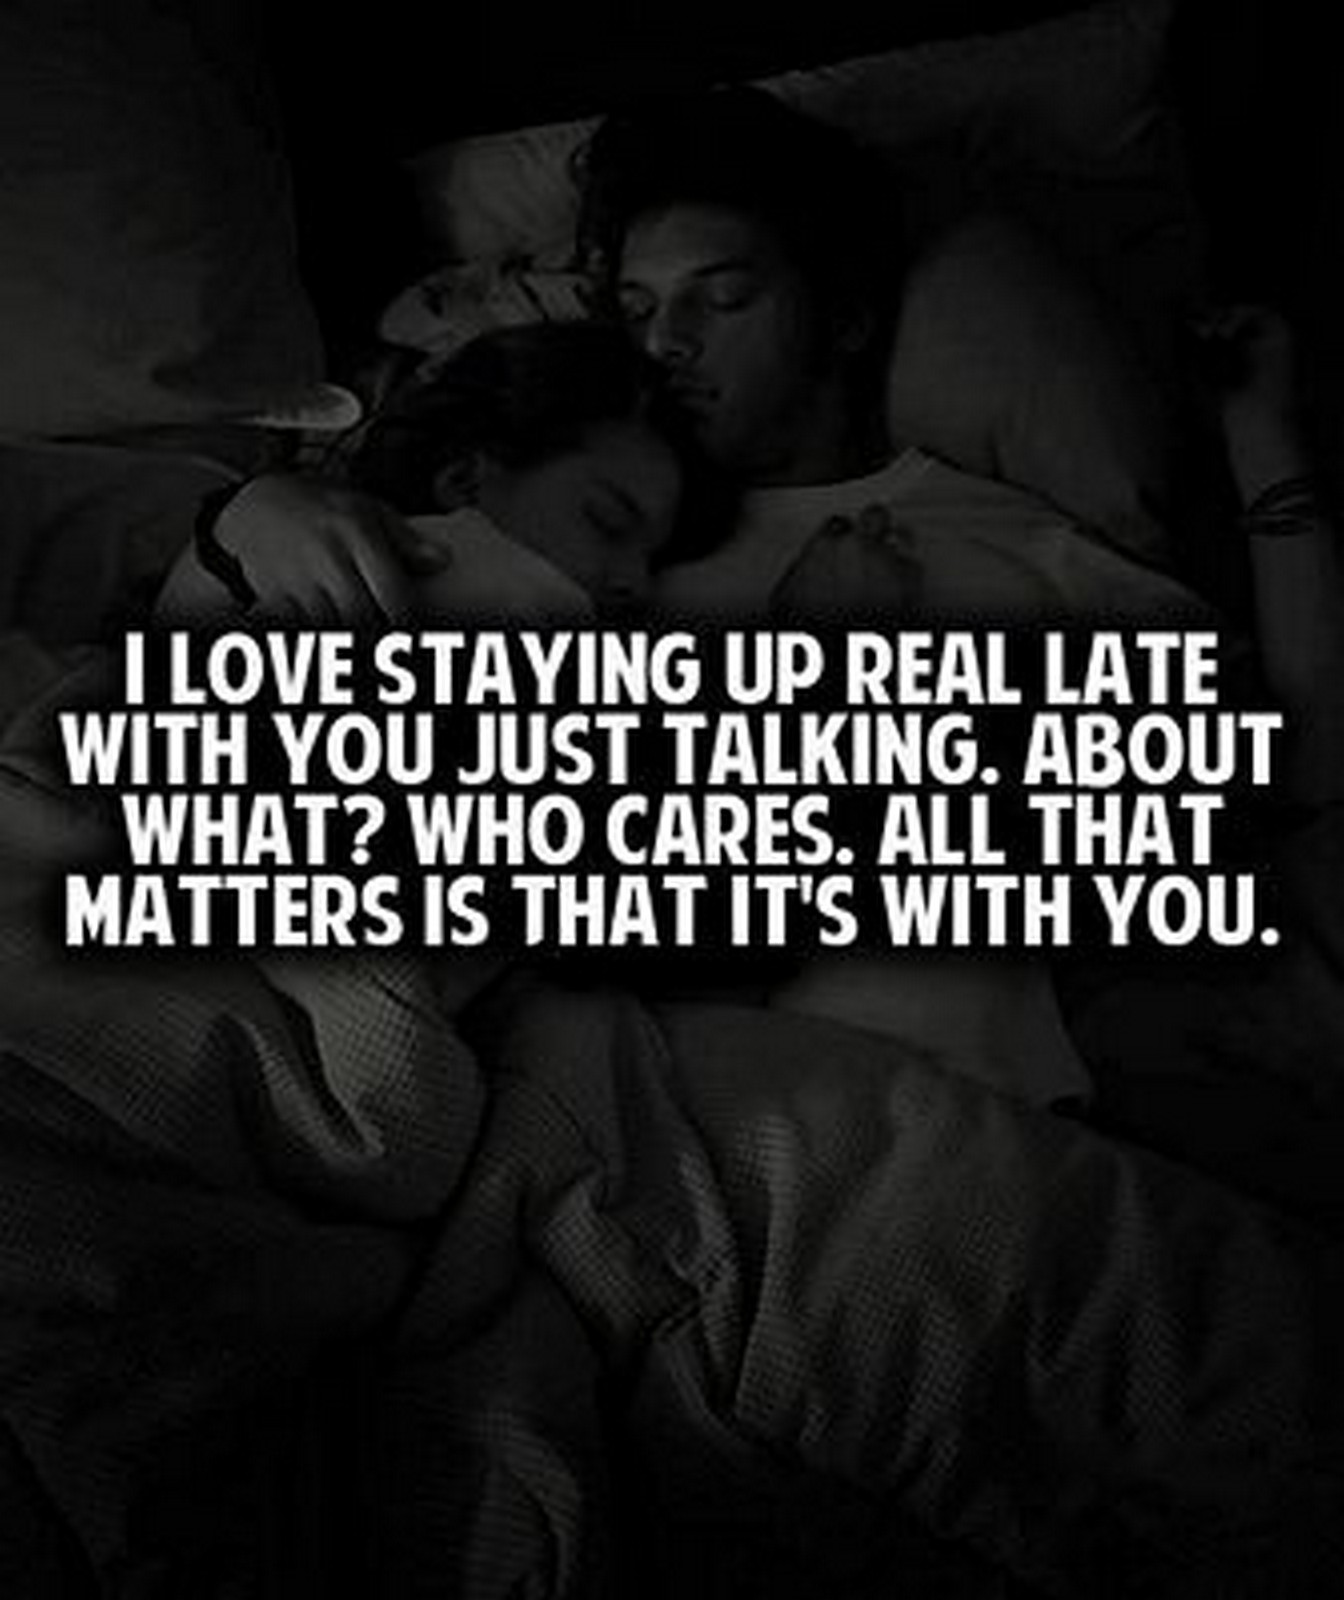 55 Romantic Quotes - "I love staying up real late with you just talking. About what? Who cares. All that matters is that it's with you."